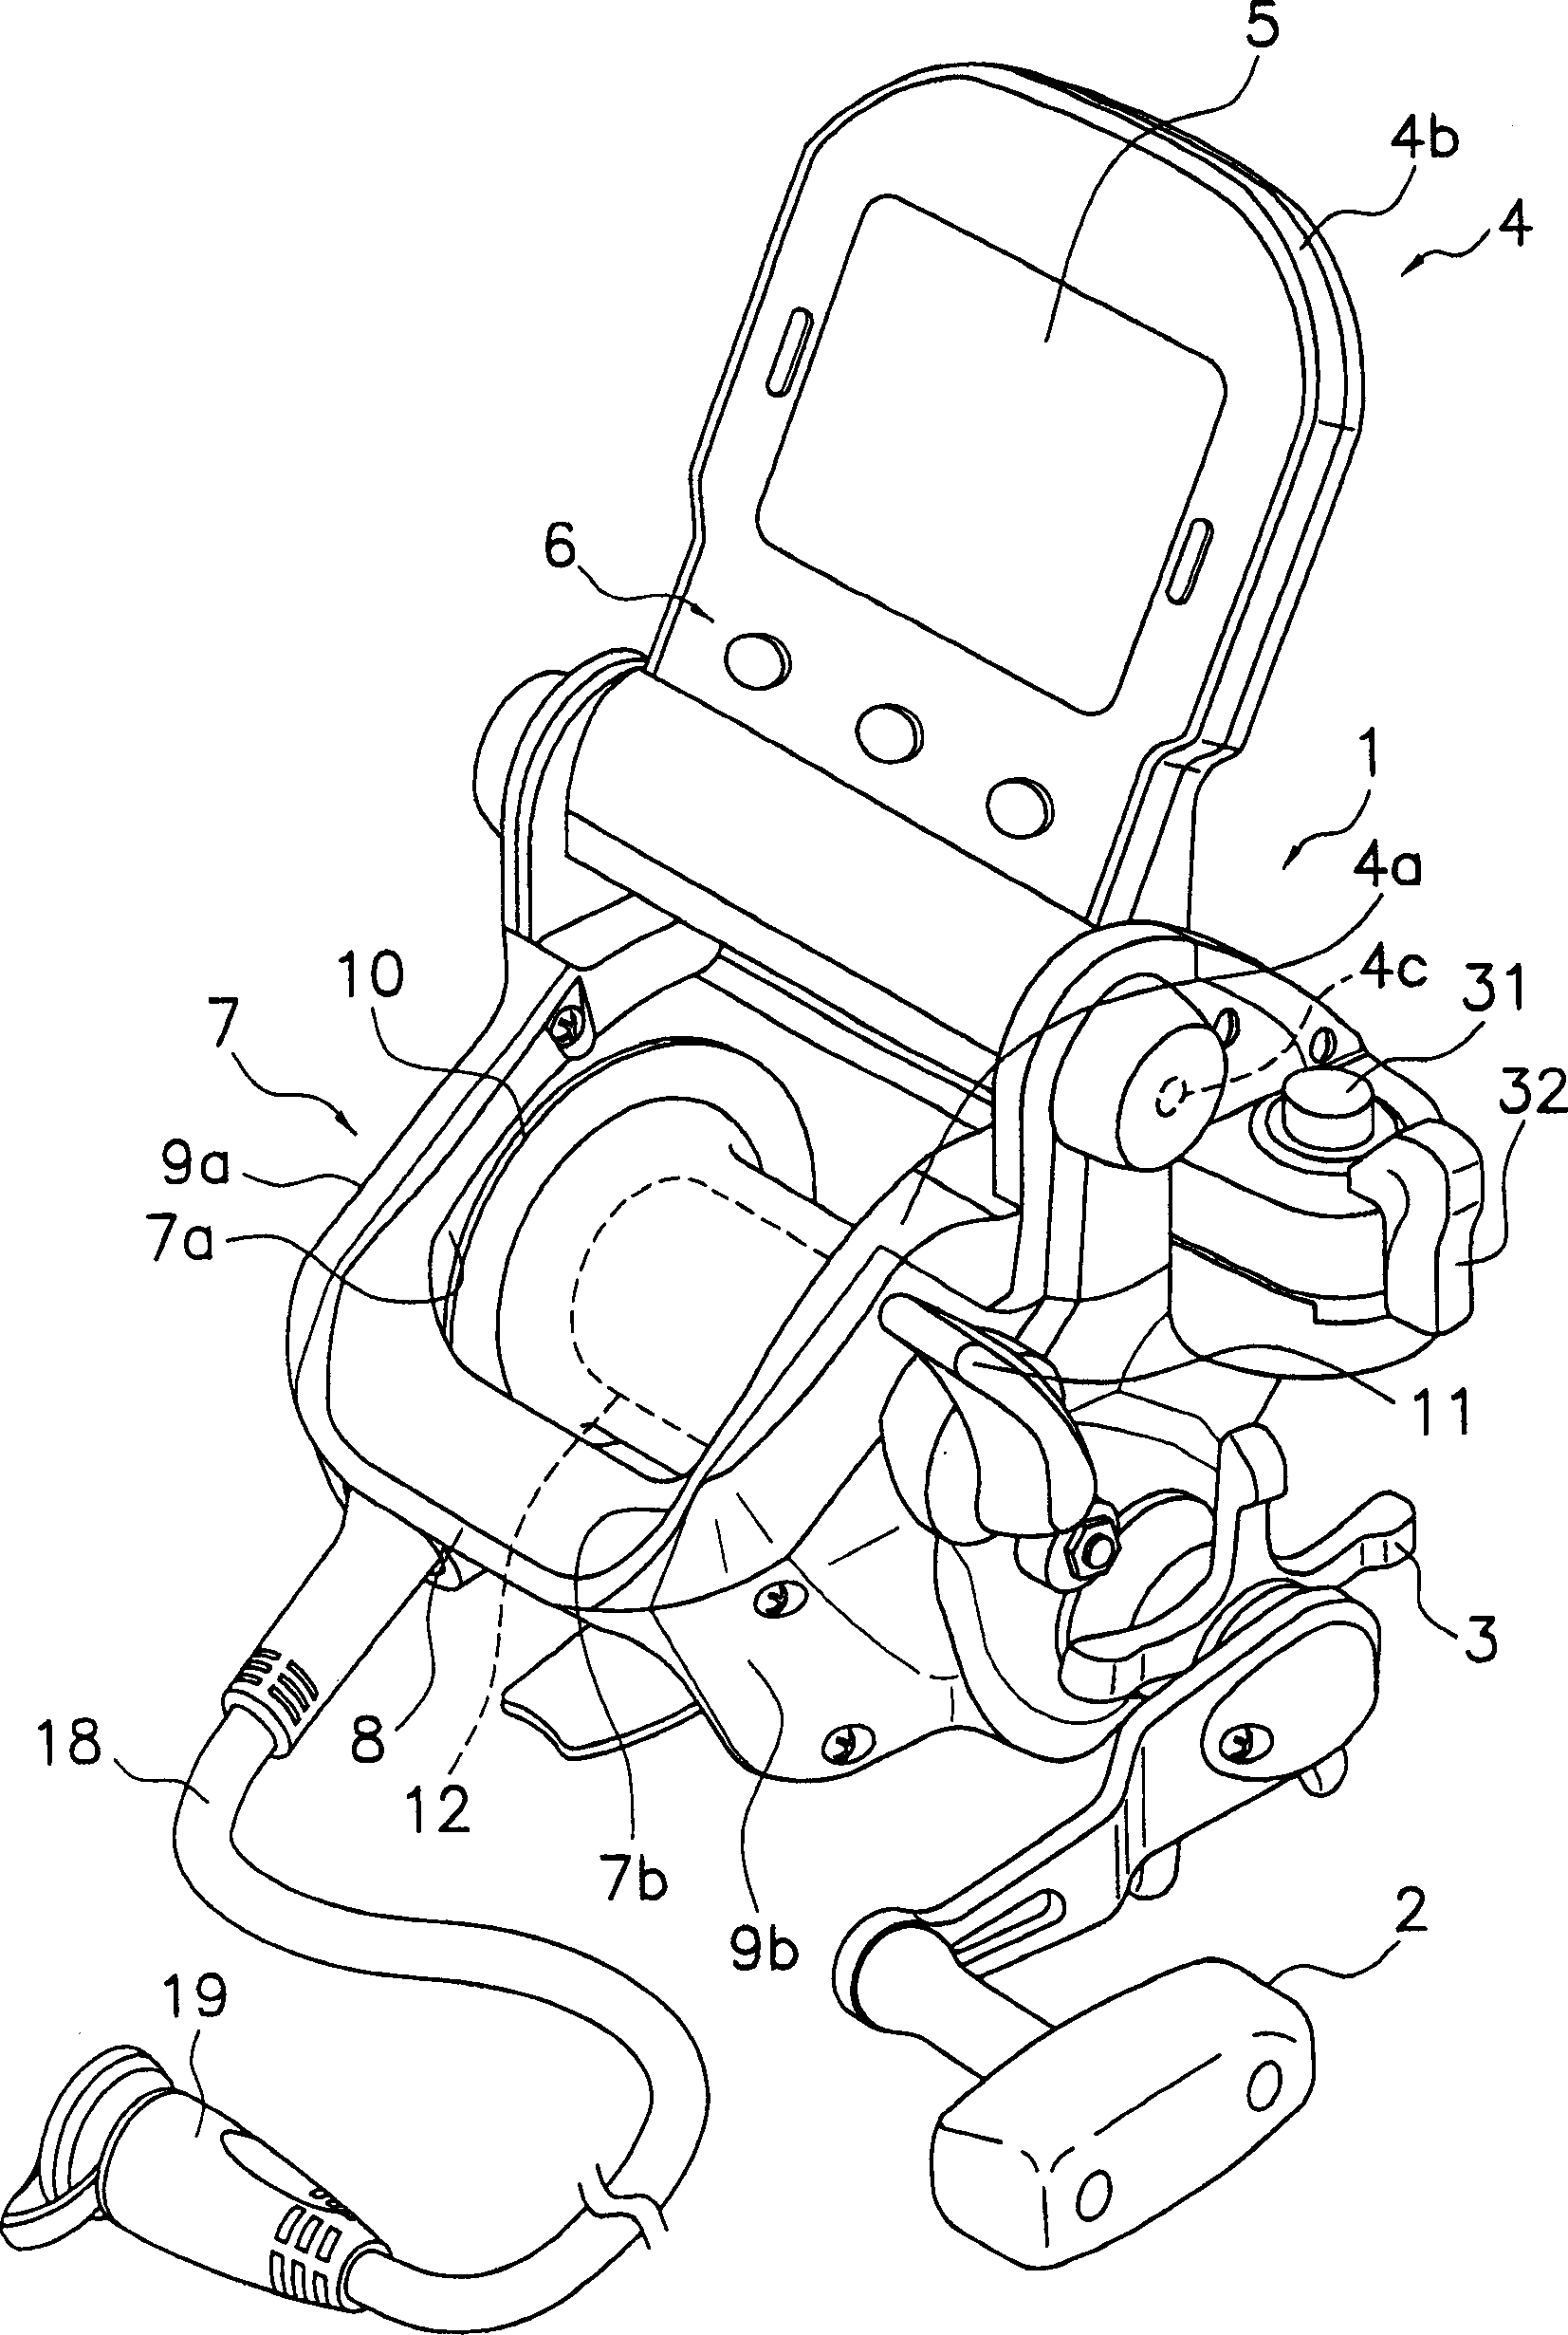 Motor control device for motor driven reel